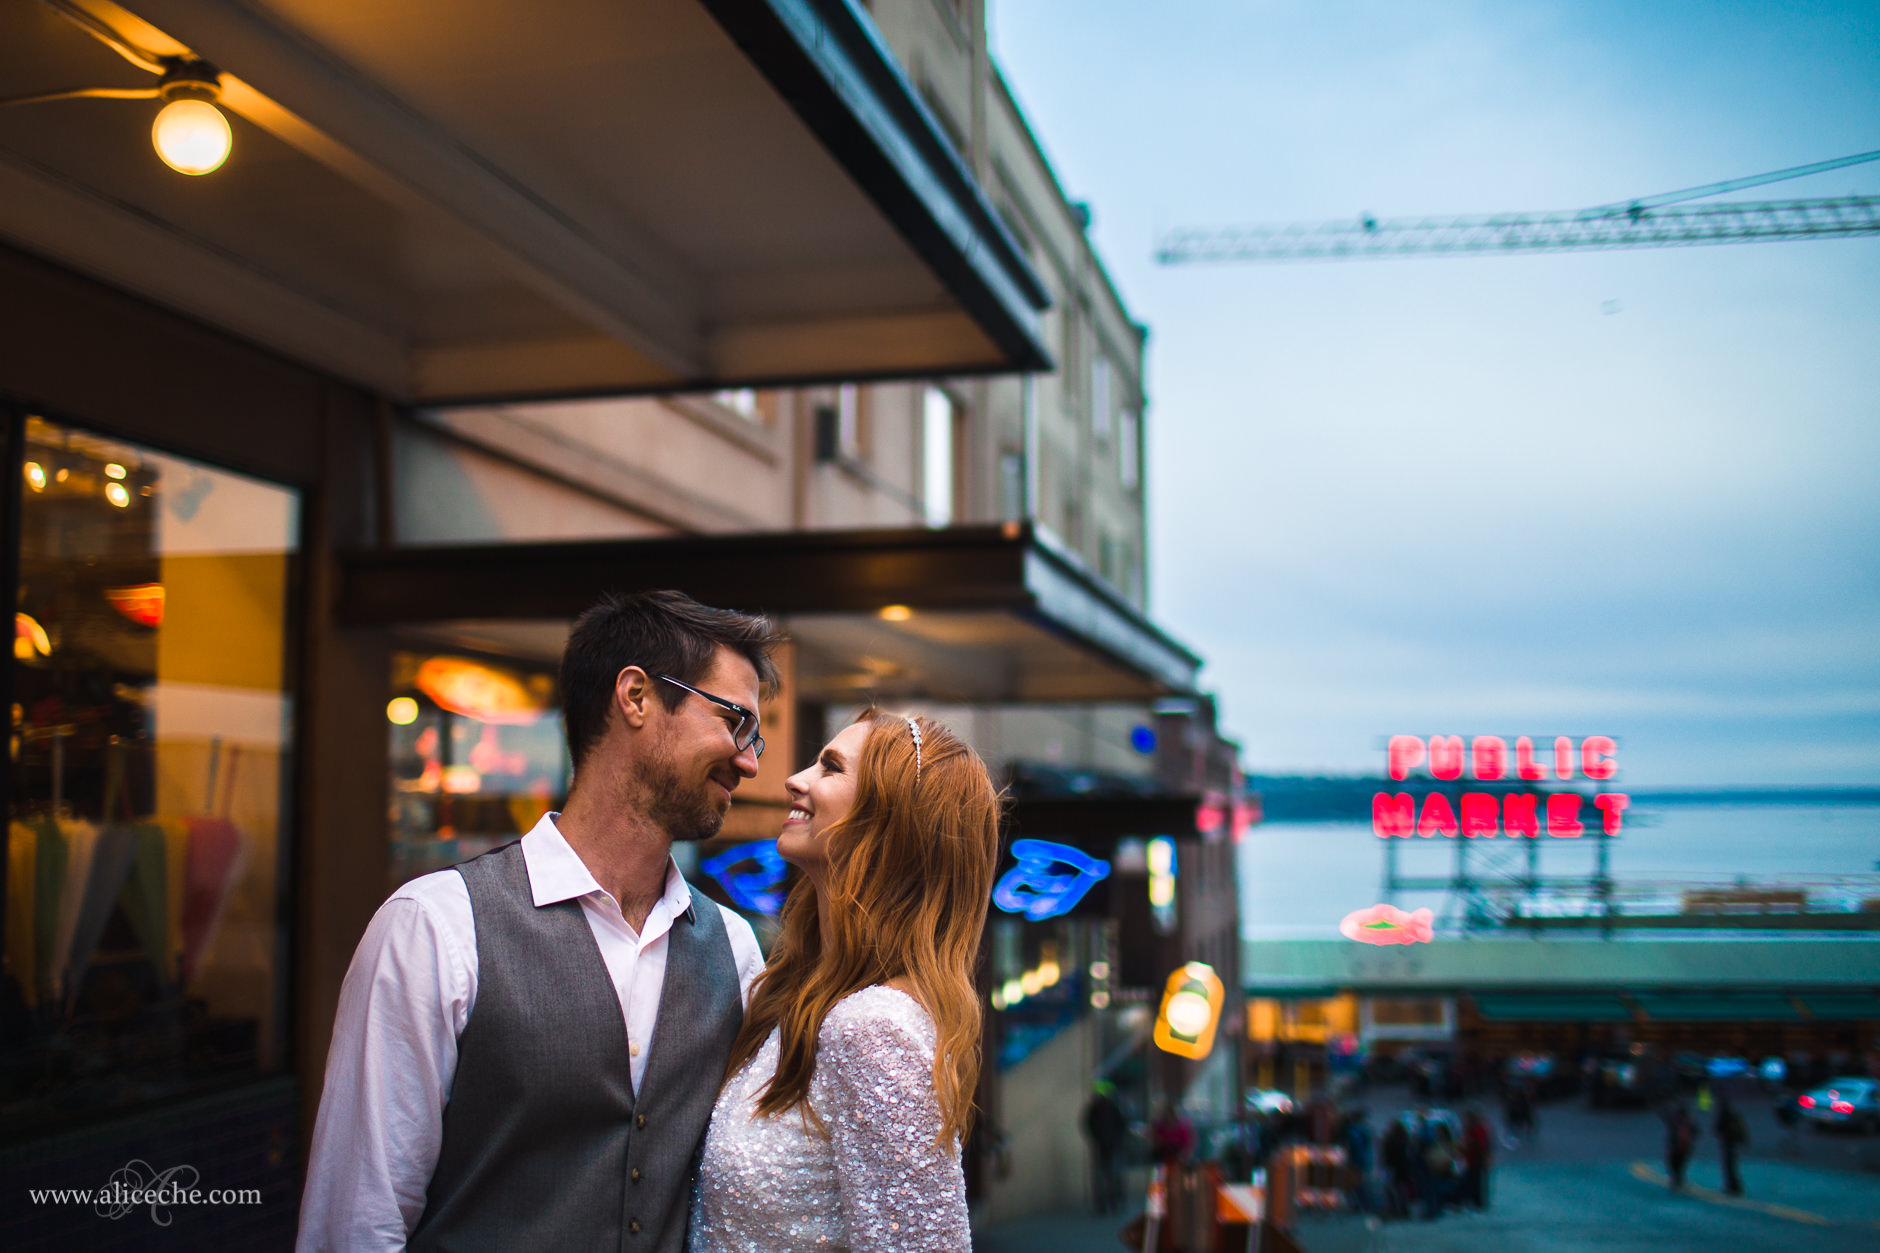 Bride and Groom at Pike Place Market at Night